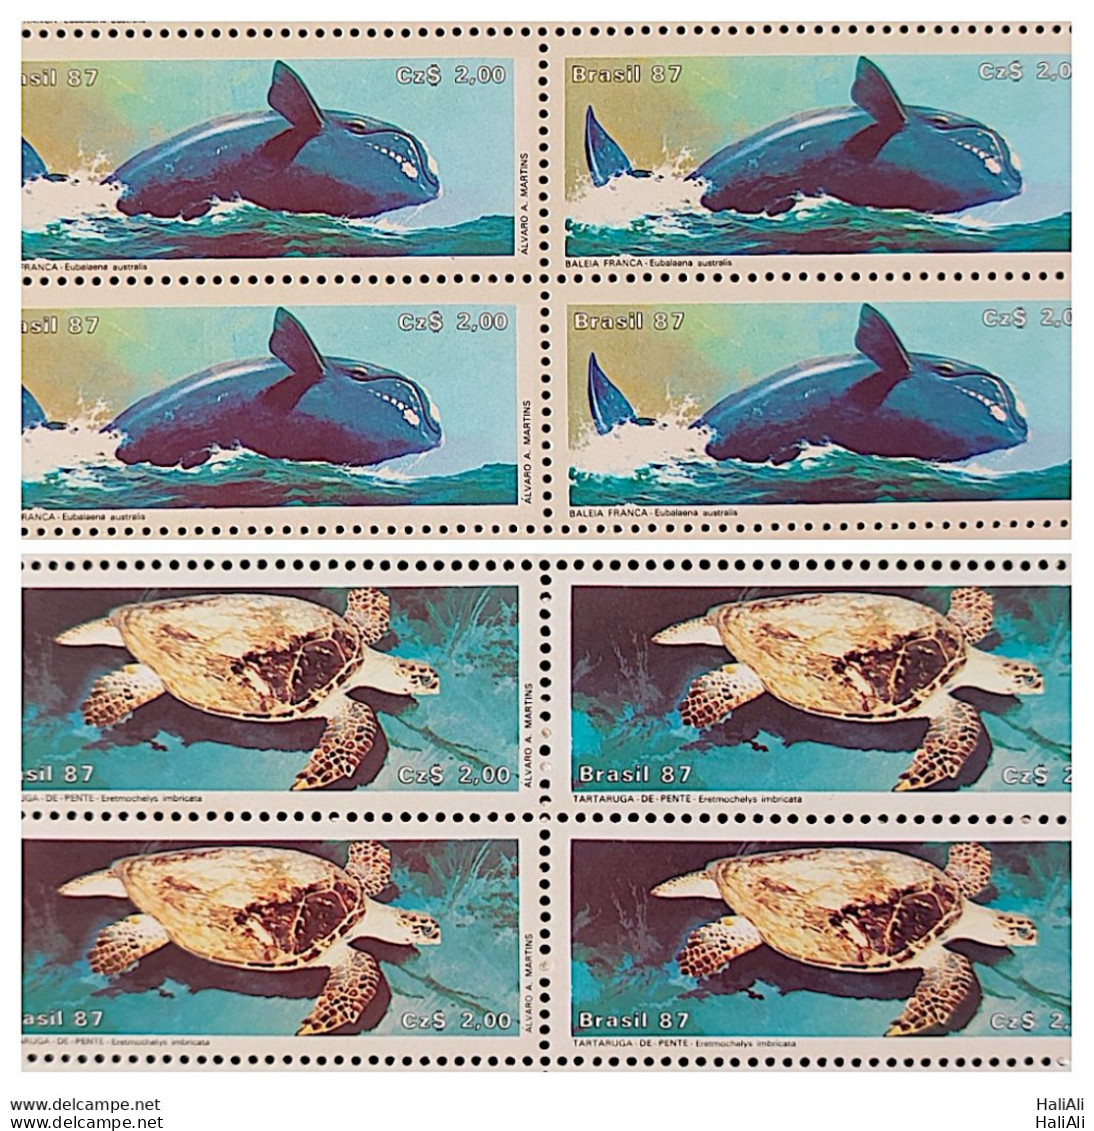 C 1549 Brazil Stamp Brazilian Fauna Turtle Whale 1987 Block Of 4 Complete Series - Unused Stamps